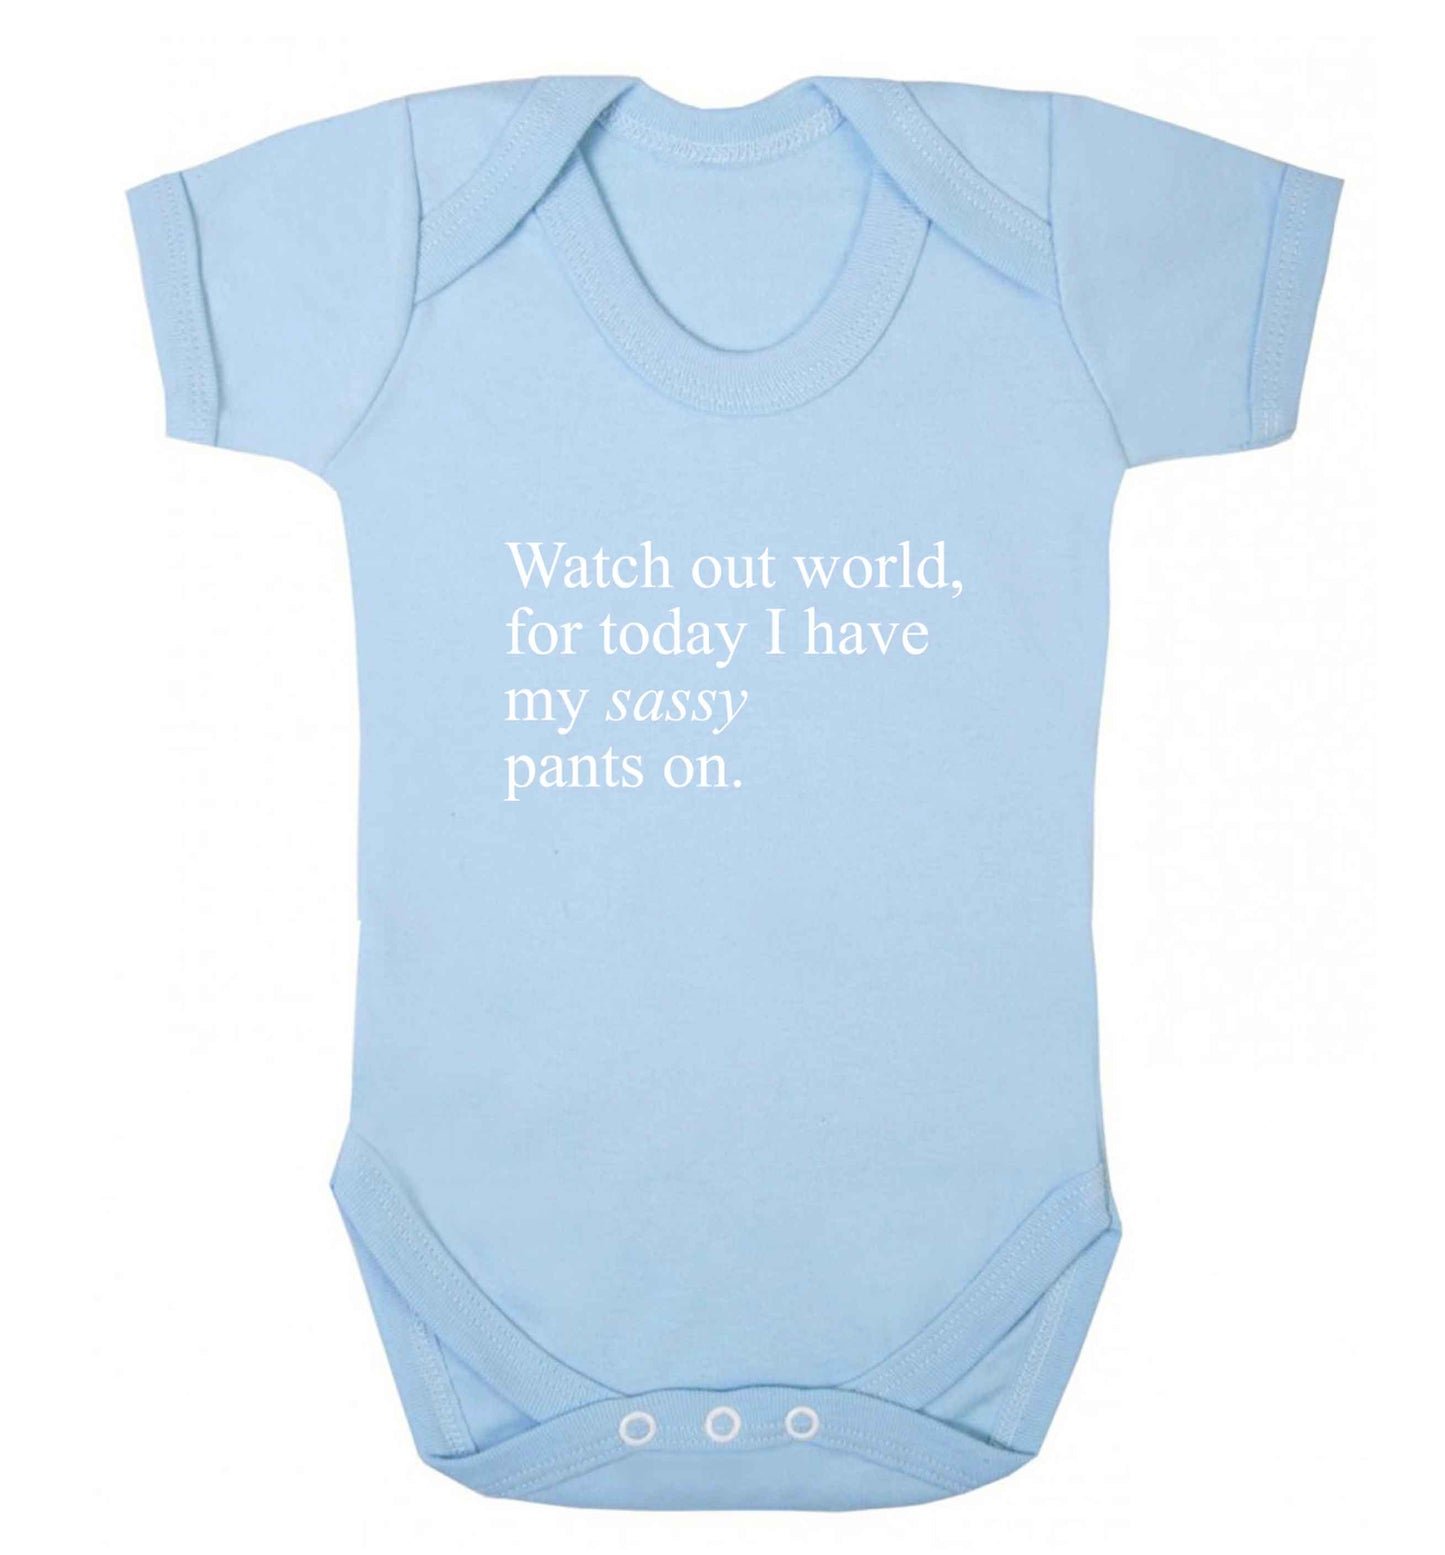 Watch out world for today I have my sassy pants on baby vest pale blue 18-24 months